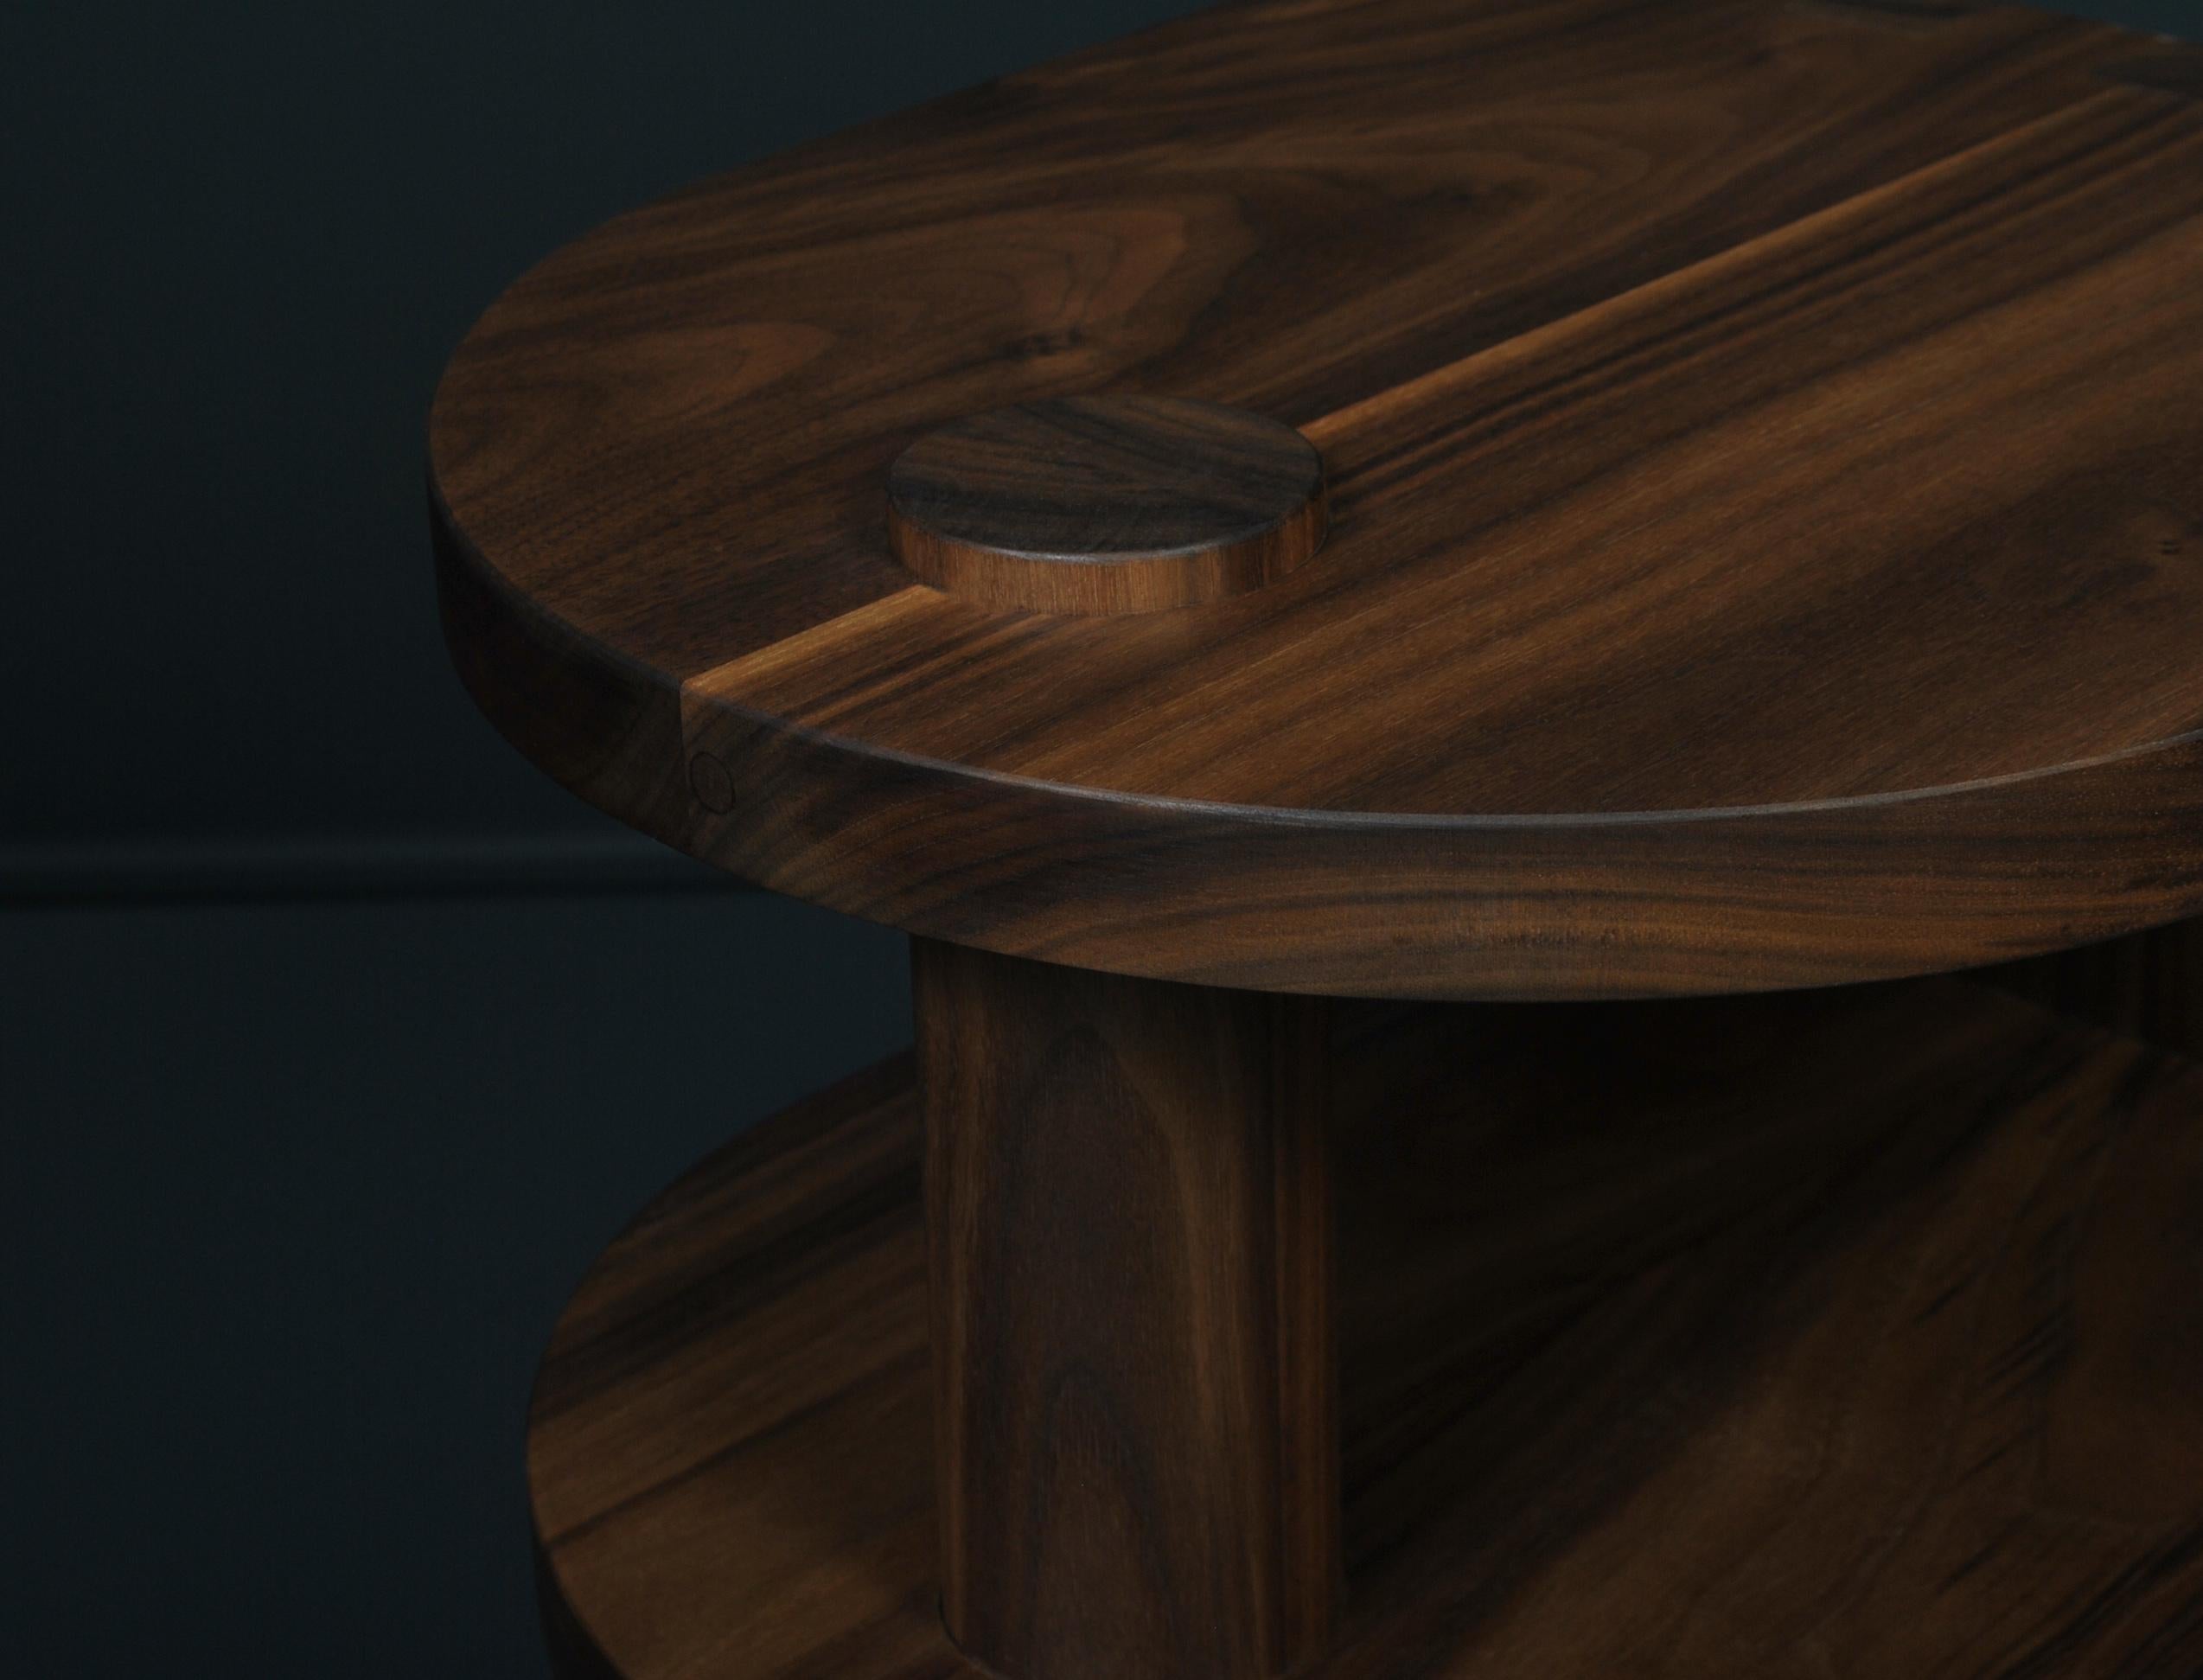 Hand-Crafted Architectural Handcrafted Walnut End Table